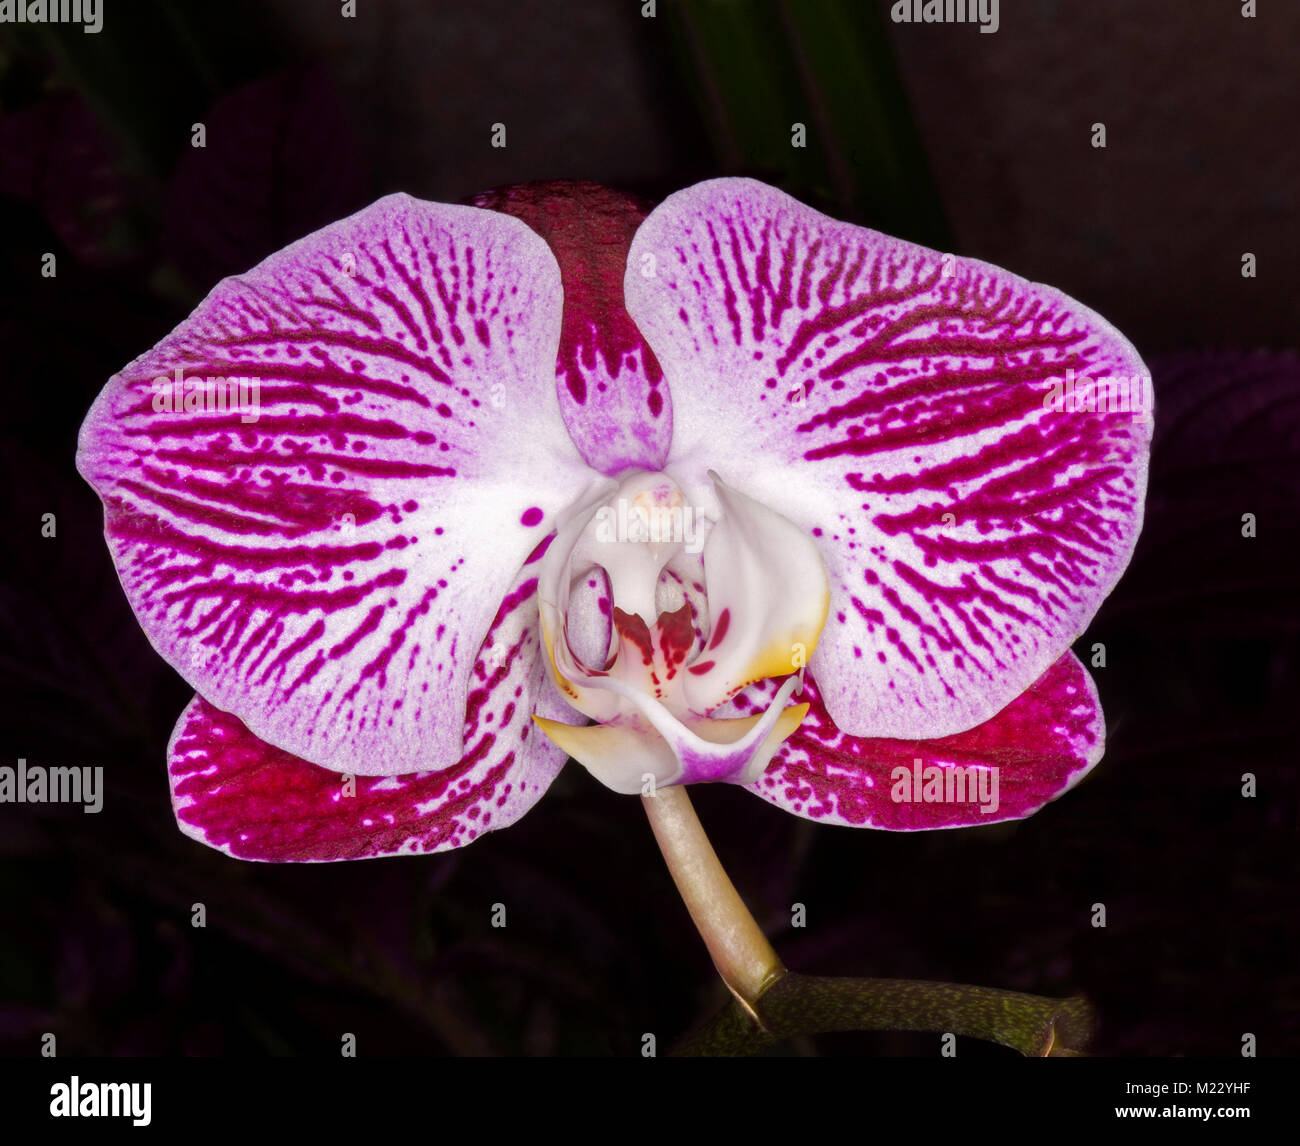 Spectacular vivid purple / magenta and white striped flower of Phalaenopsis / moth orchid against black background Stock Photo